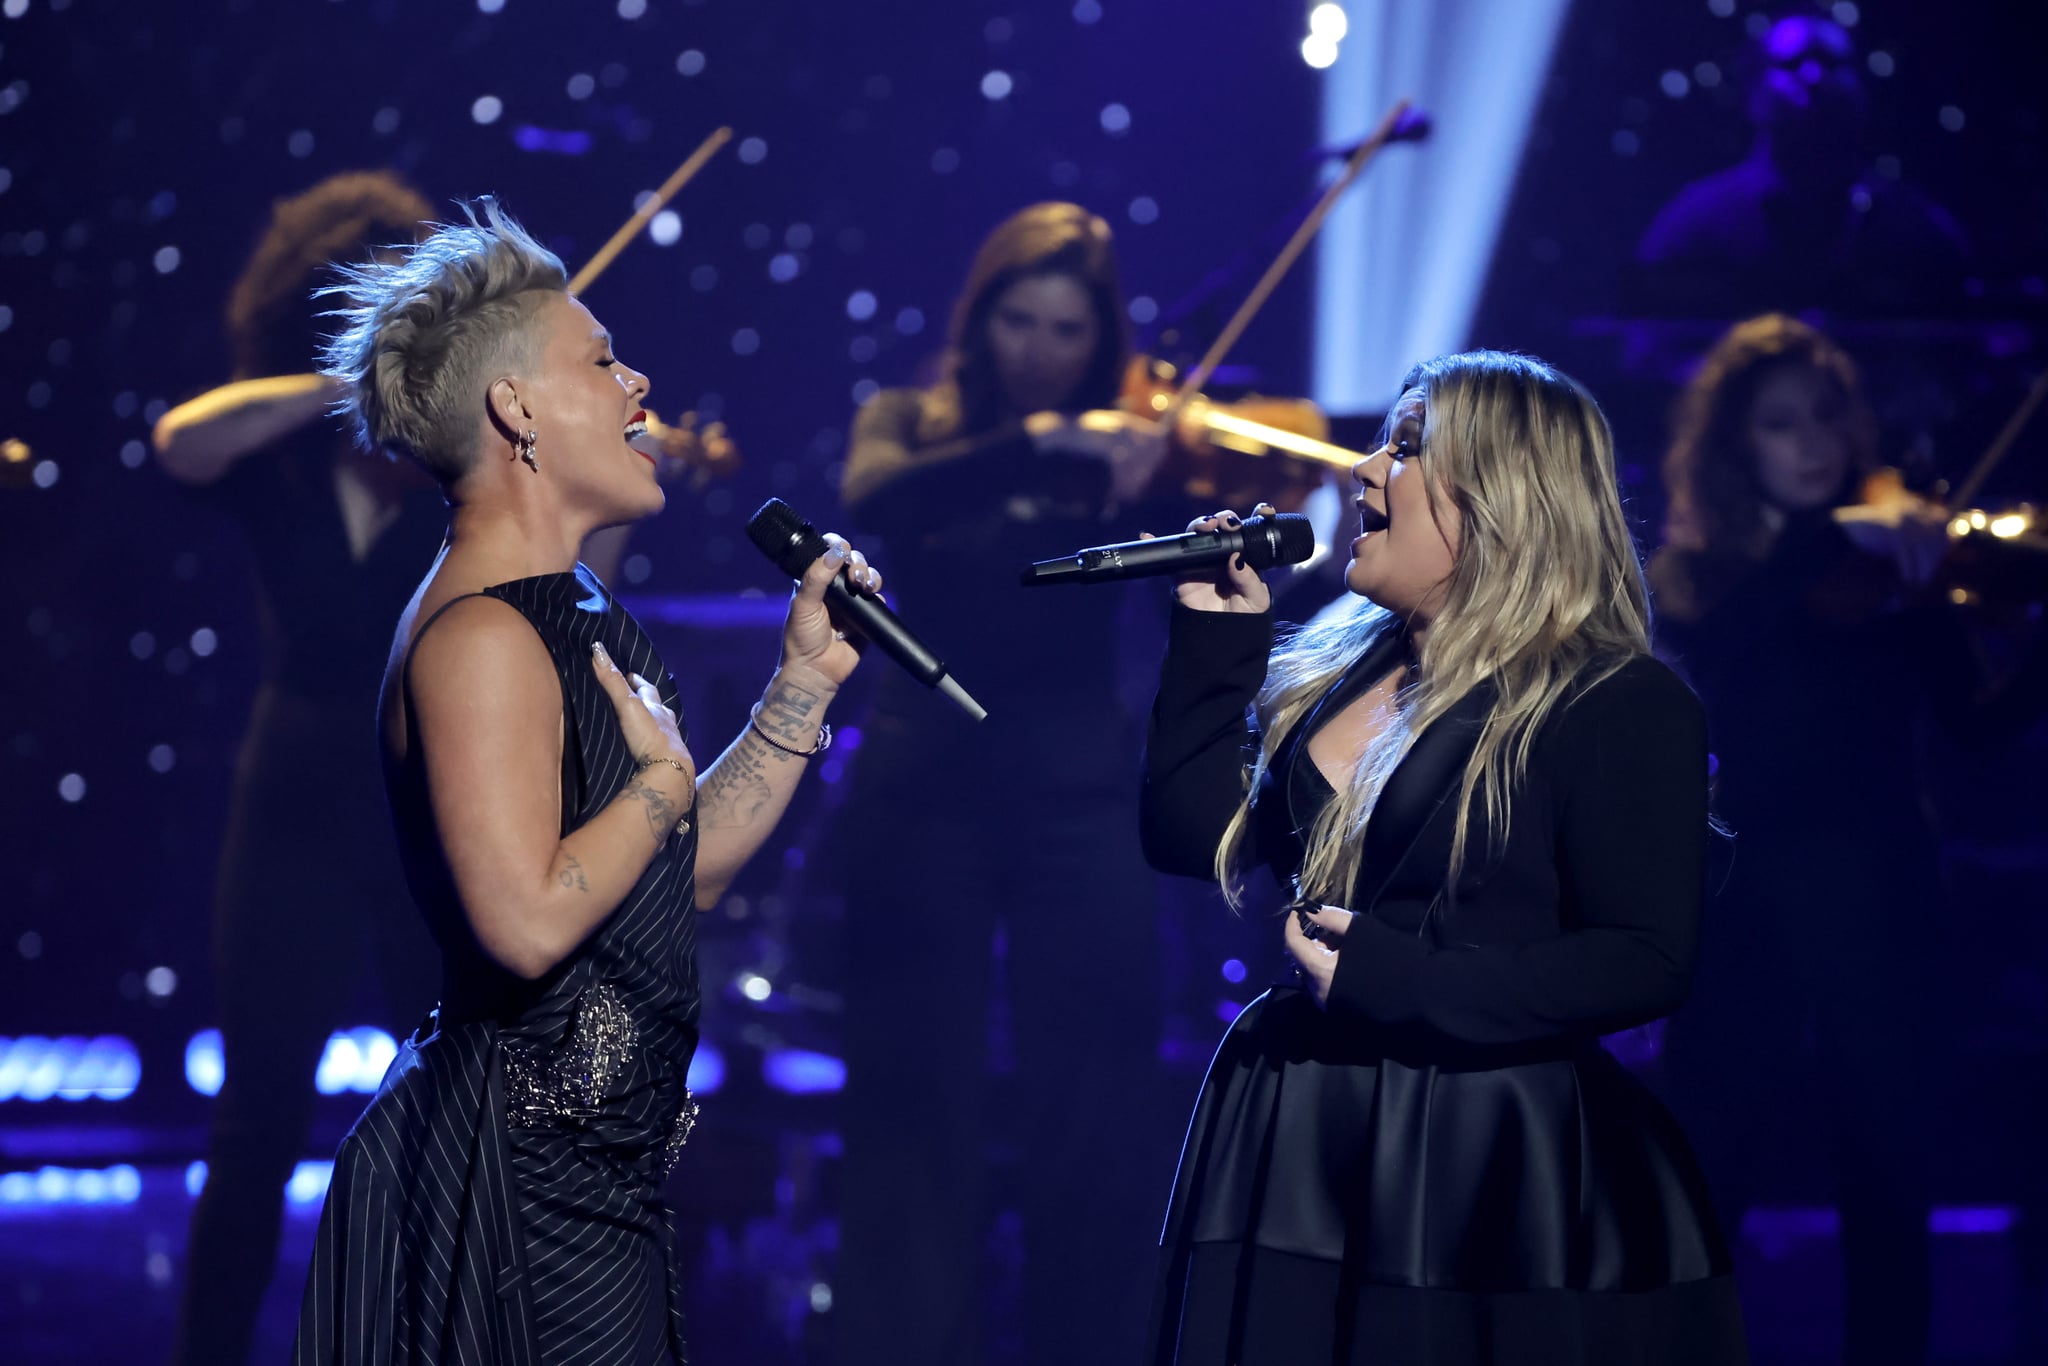 LOS ANGELES, CALIFORNIA - MARCH 27: (FOR EDITORIAL USE ONLY) (L-R) P!NK and Kelly Clarkson perform onstage during the 2023 iHeartRadio Music Awards at Dolby Theatre in Los Angeles, California on March 27, 2023. Broadcasted live on FOX. (Photo by Kevin Winter/Getty Images for iHeartRadio)